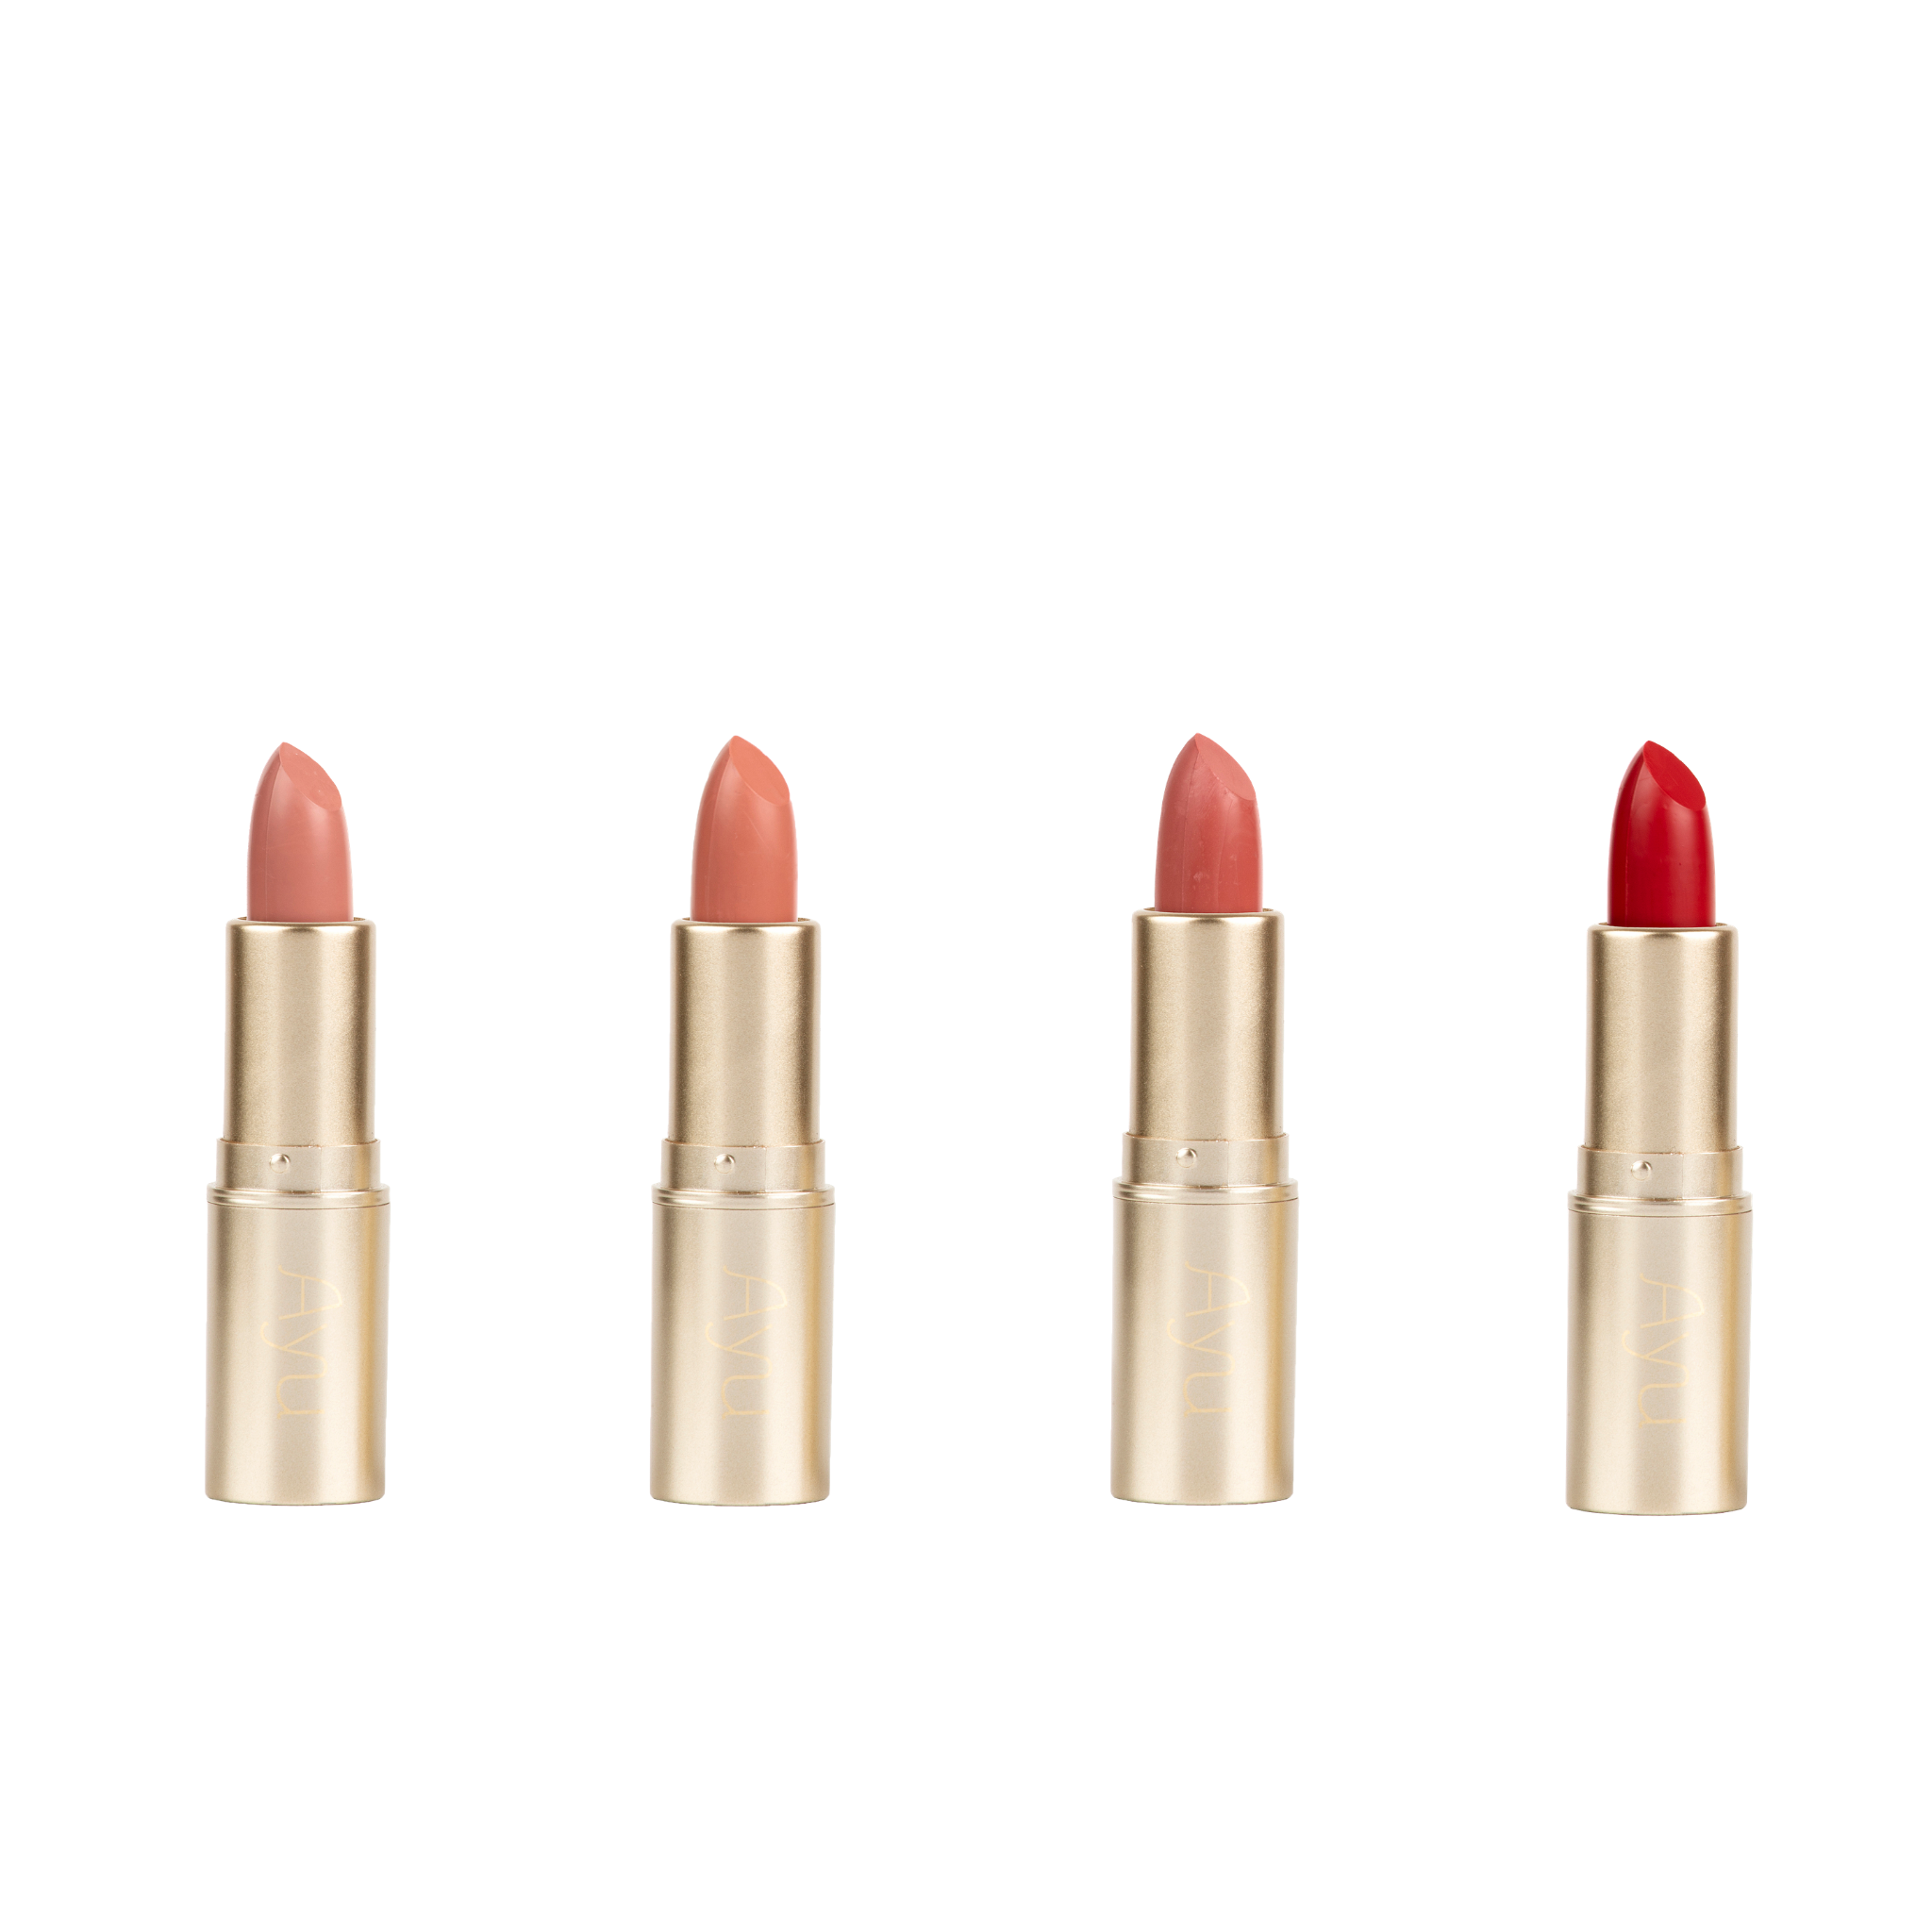 Ayu Lipstick Blushed Berry – Vegan Friendly – Suitable For Sensitive Skin – Ayu.ie